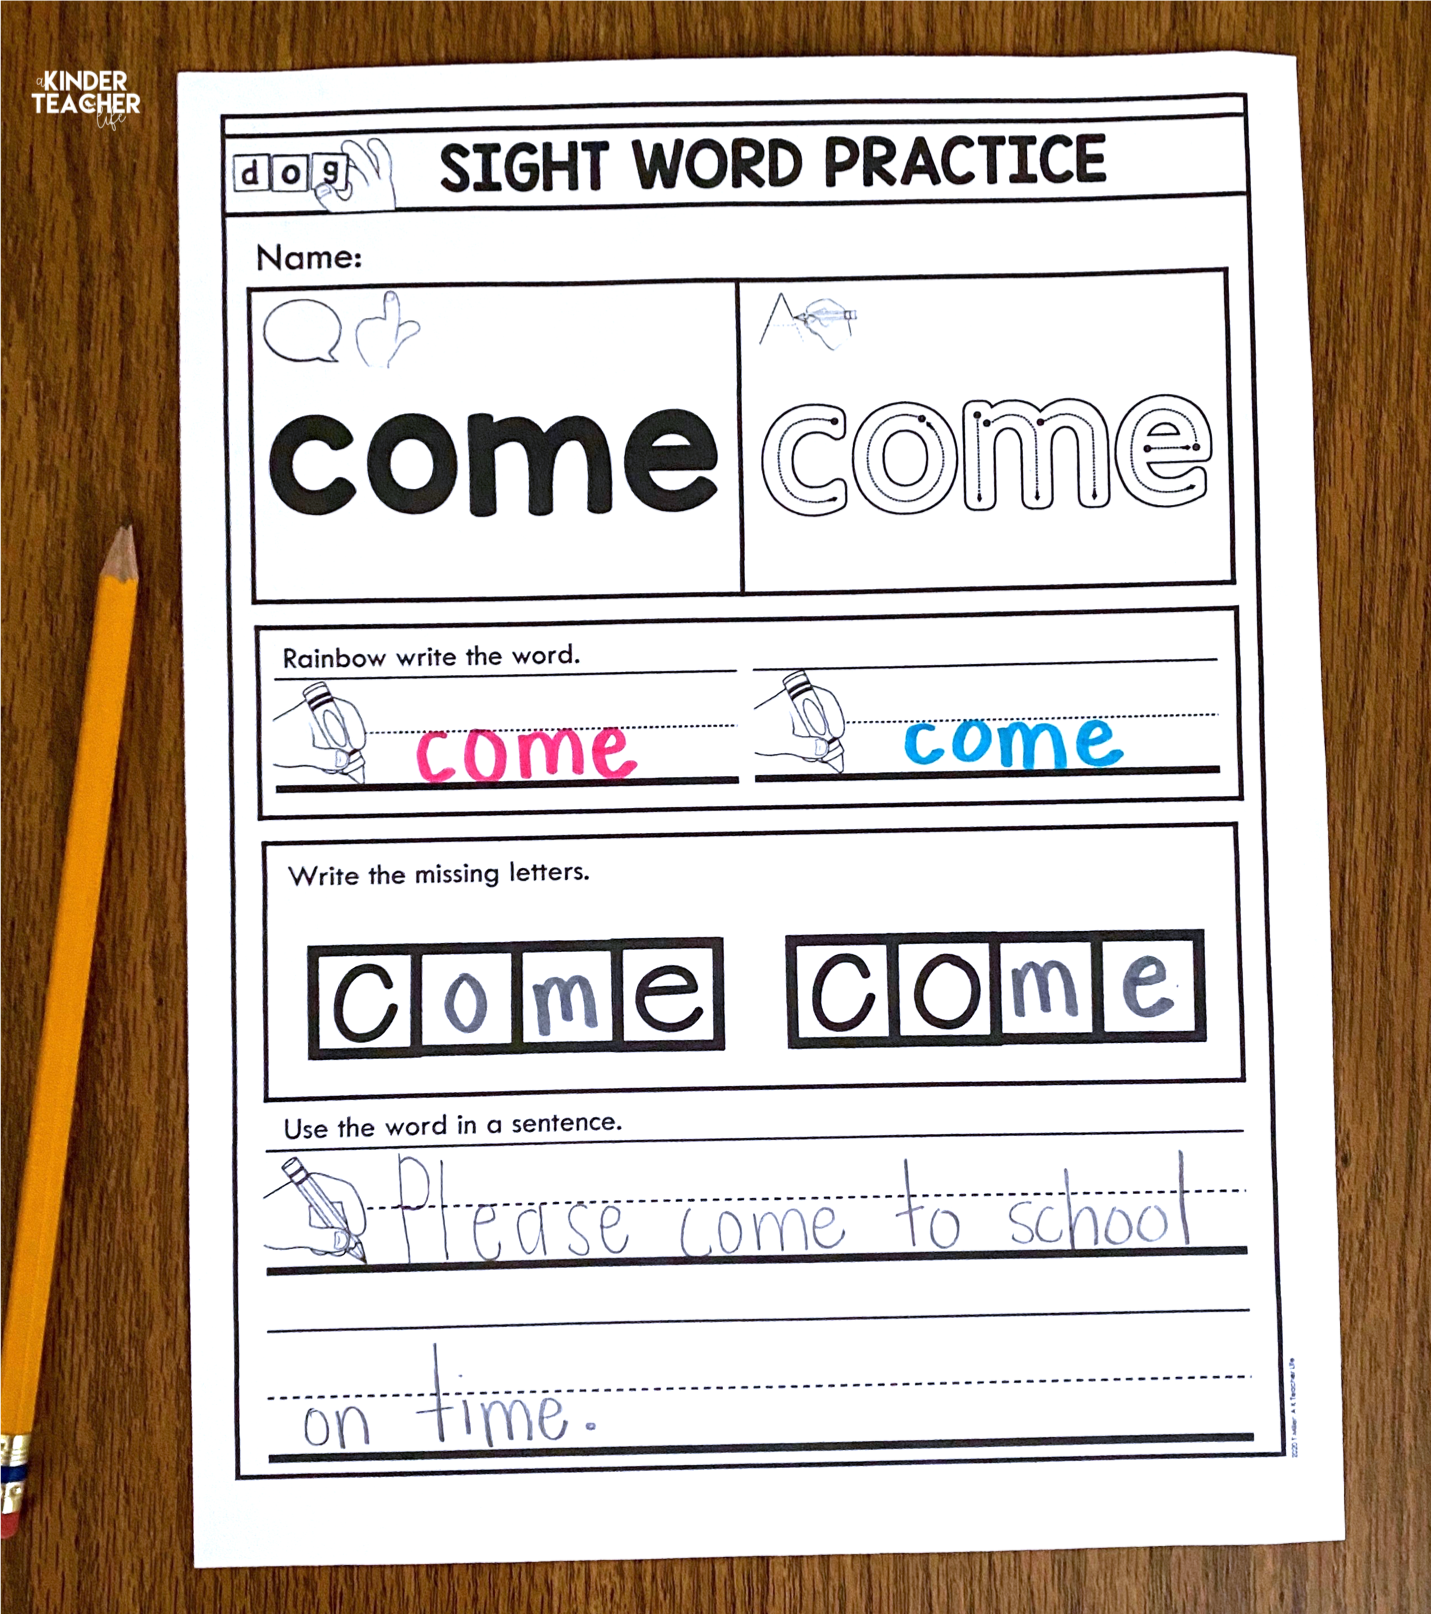 Free sight word practice worksheets for kindergarten and first graders. 30 high-frequency words included! 